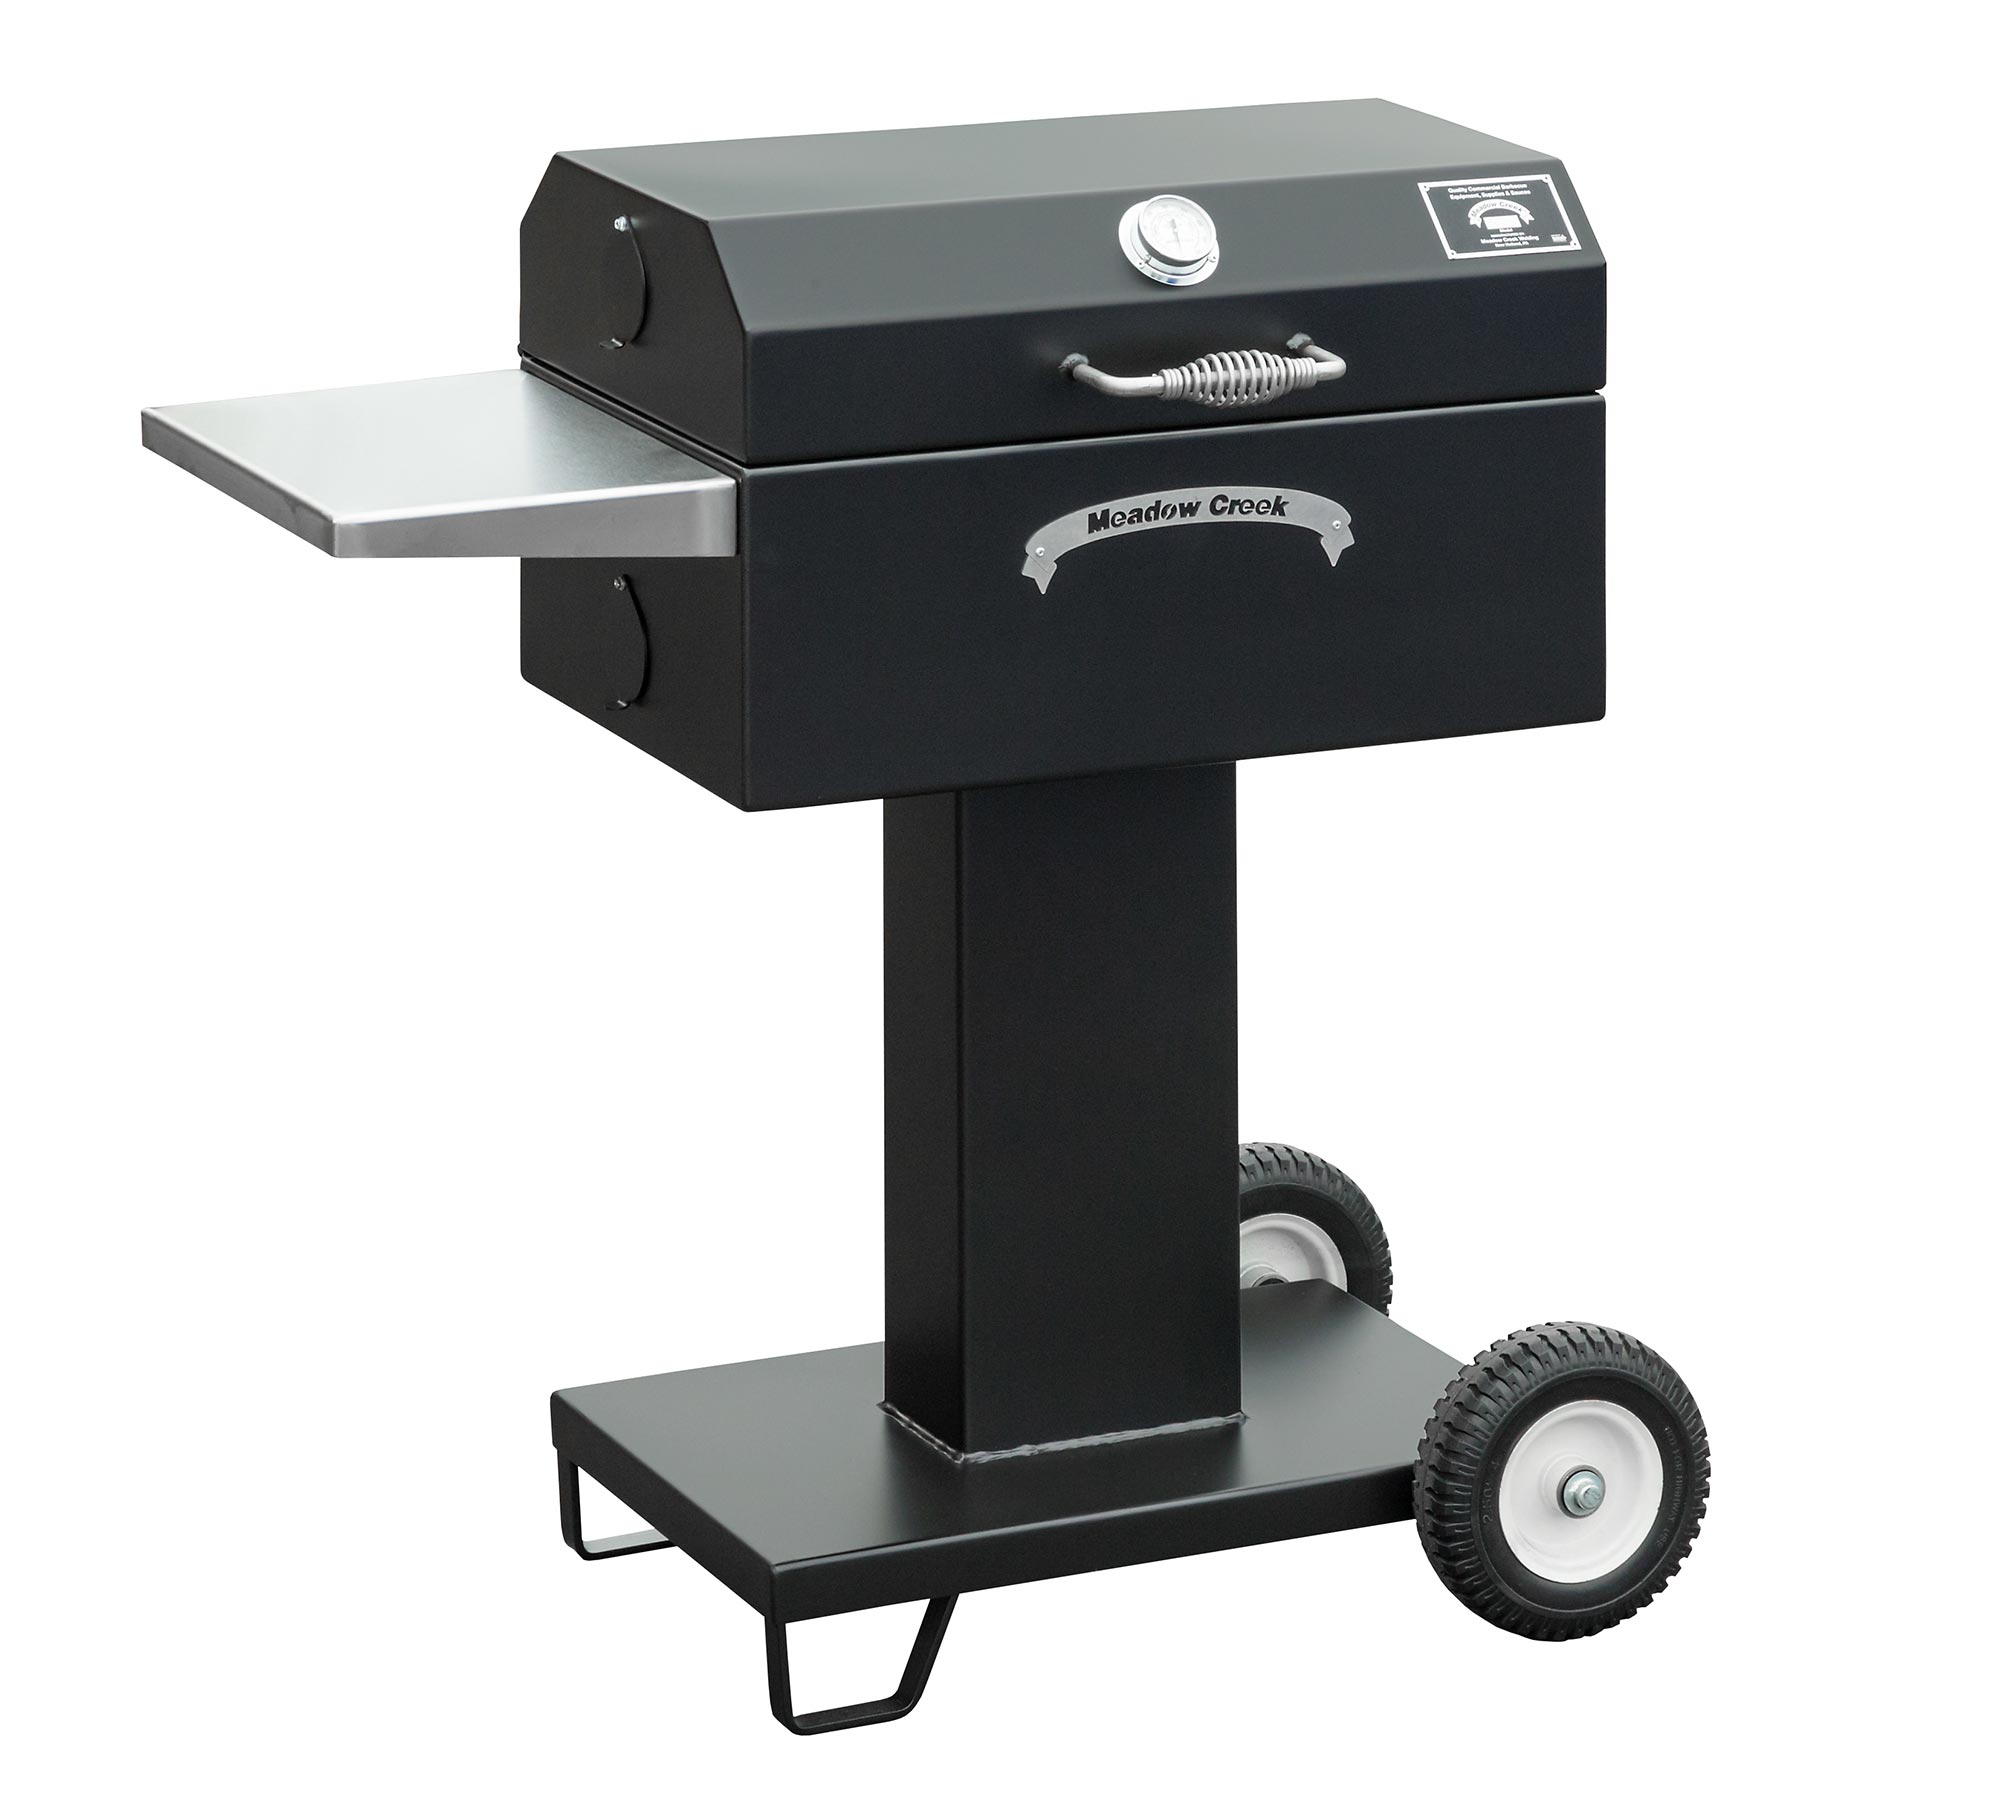 PG25 Patio Grill With Optional Stainless Steel Shelf